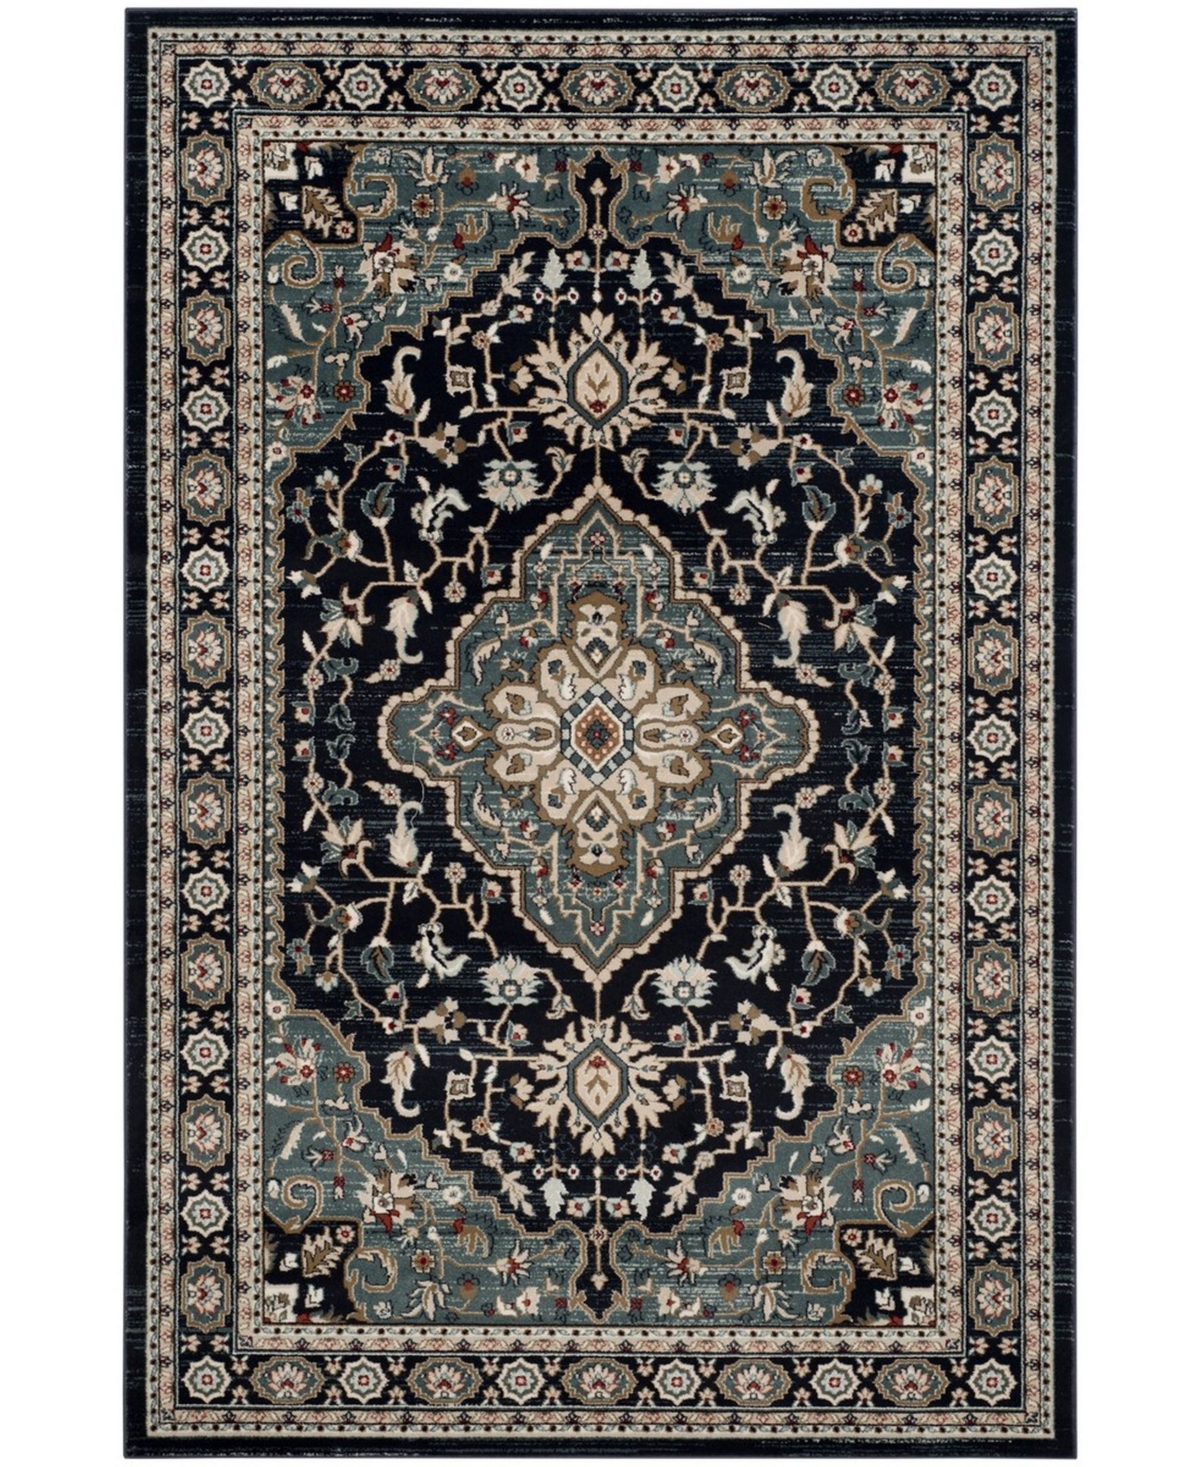 Safavieh Lyndhurst Anthracite and Teal 8' x 10' Area Rug - Grey Group